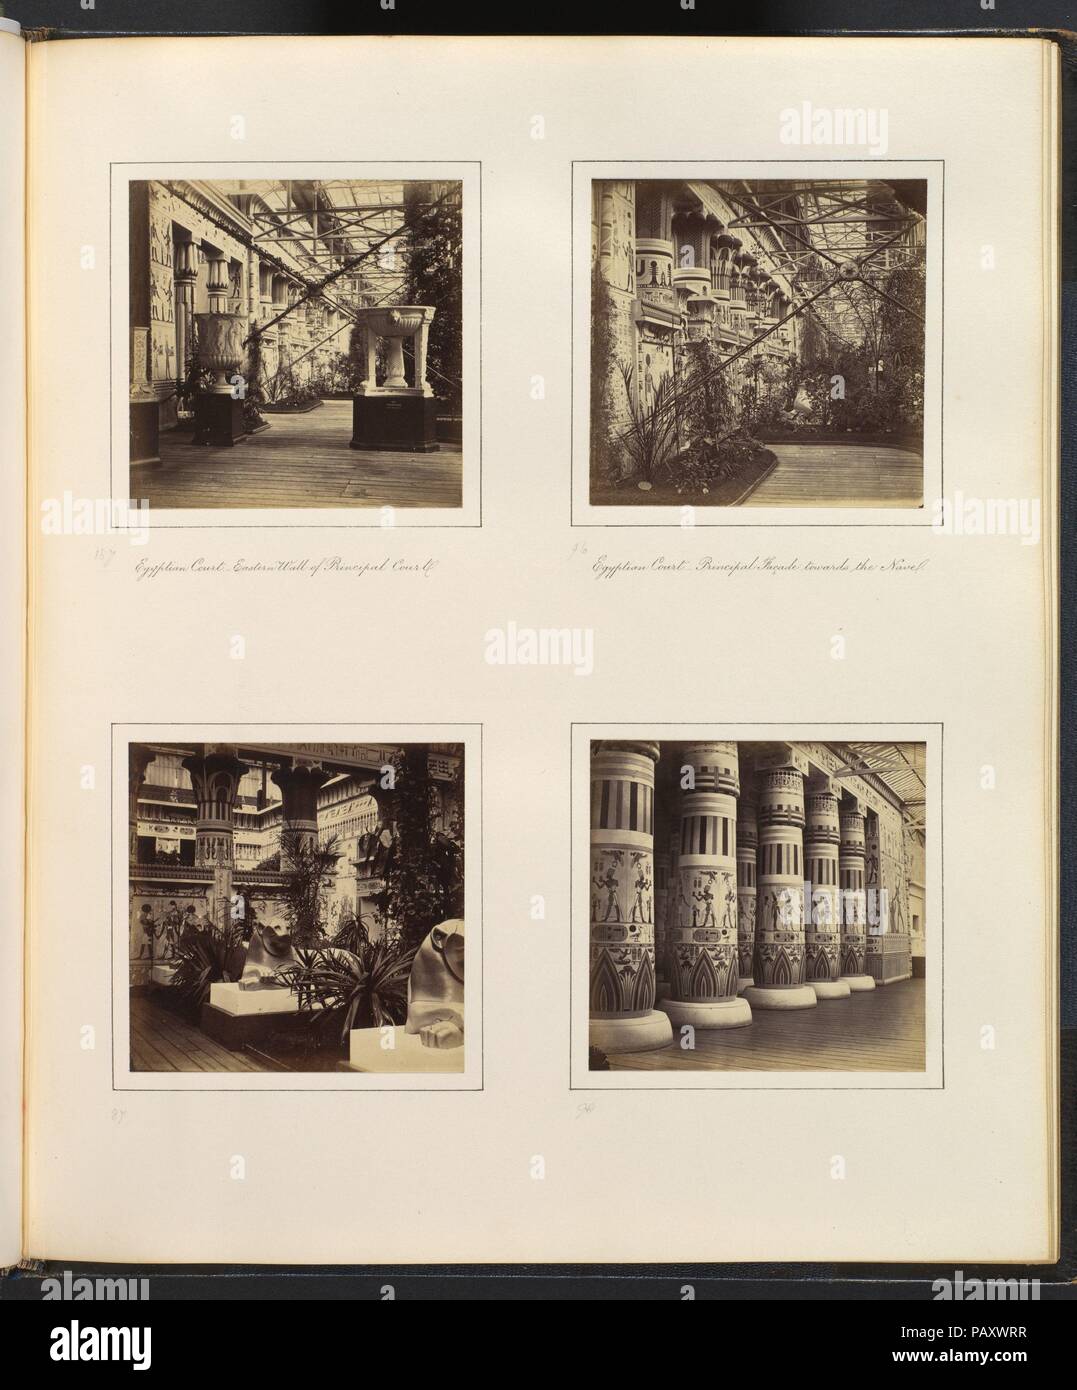 [Egyptian Court, Eastern Wall of Principal Court; Egyptian Court, Principal Facade towards the Nave; Lions in the Egyptian Court; [Colonnade Adorned with Egyptian Paintings]. Artist: Attributed to Philip Henry Delamotte (British, 1821-1889). Dimensions: 7.9 x 8.1 cm (3 1/8 x 3 3/16 in.), each. Date: ca. 1859. Museum: Metropolitan Museum of Art, New York, USA. Stock Photo